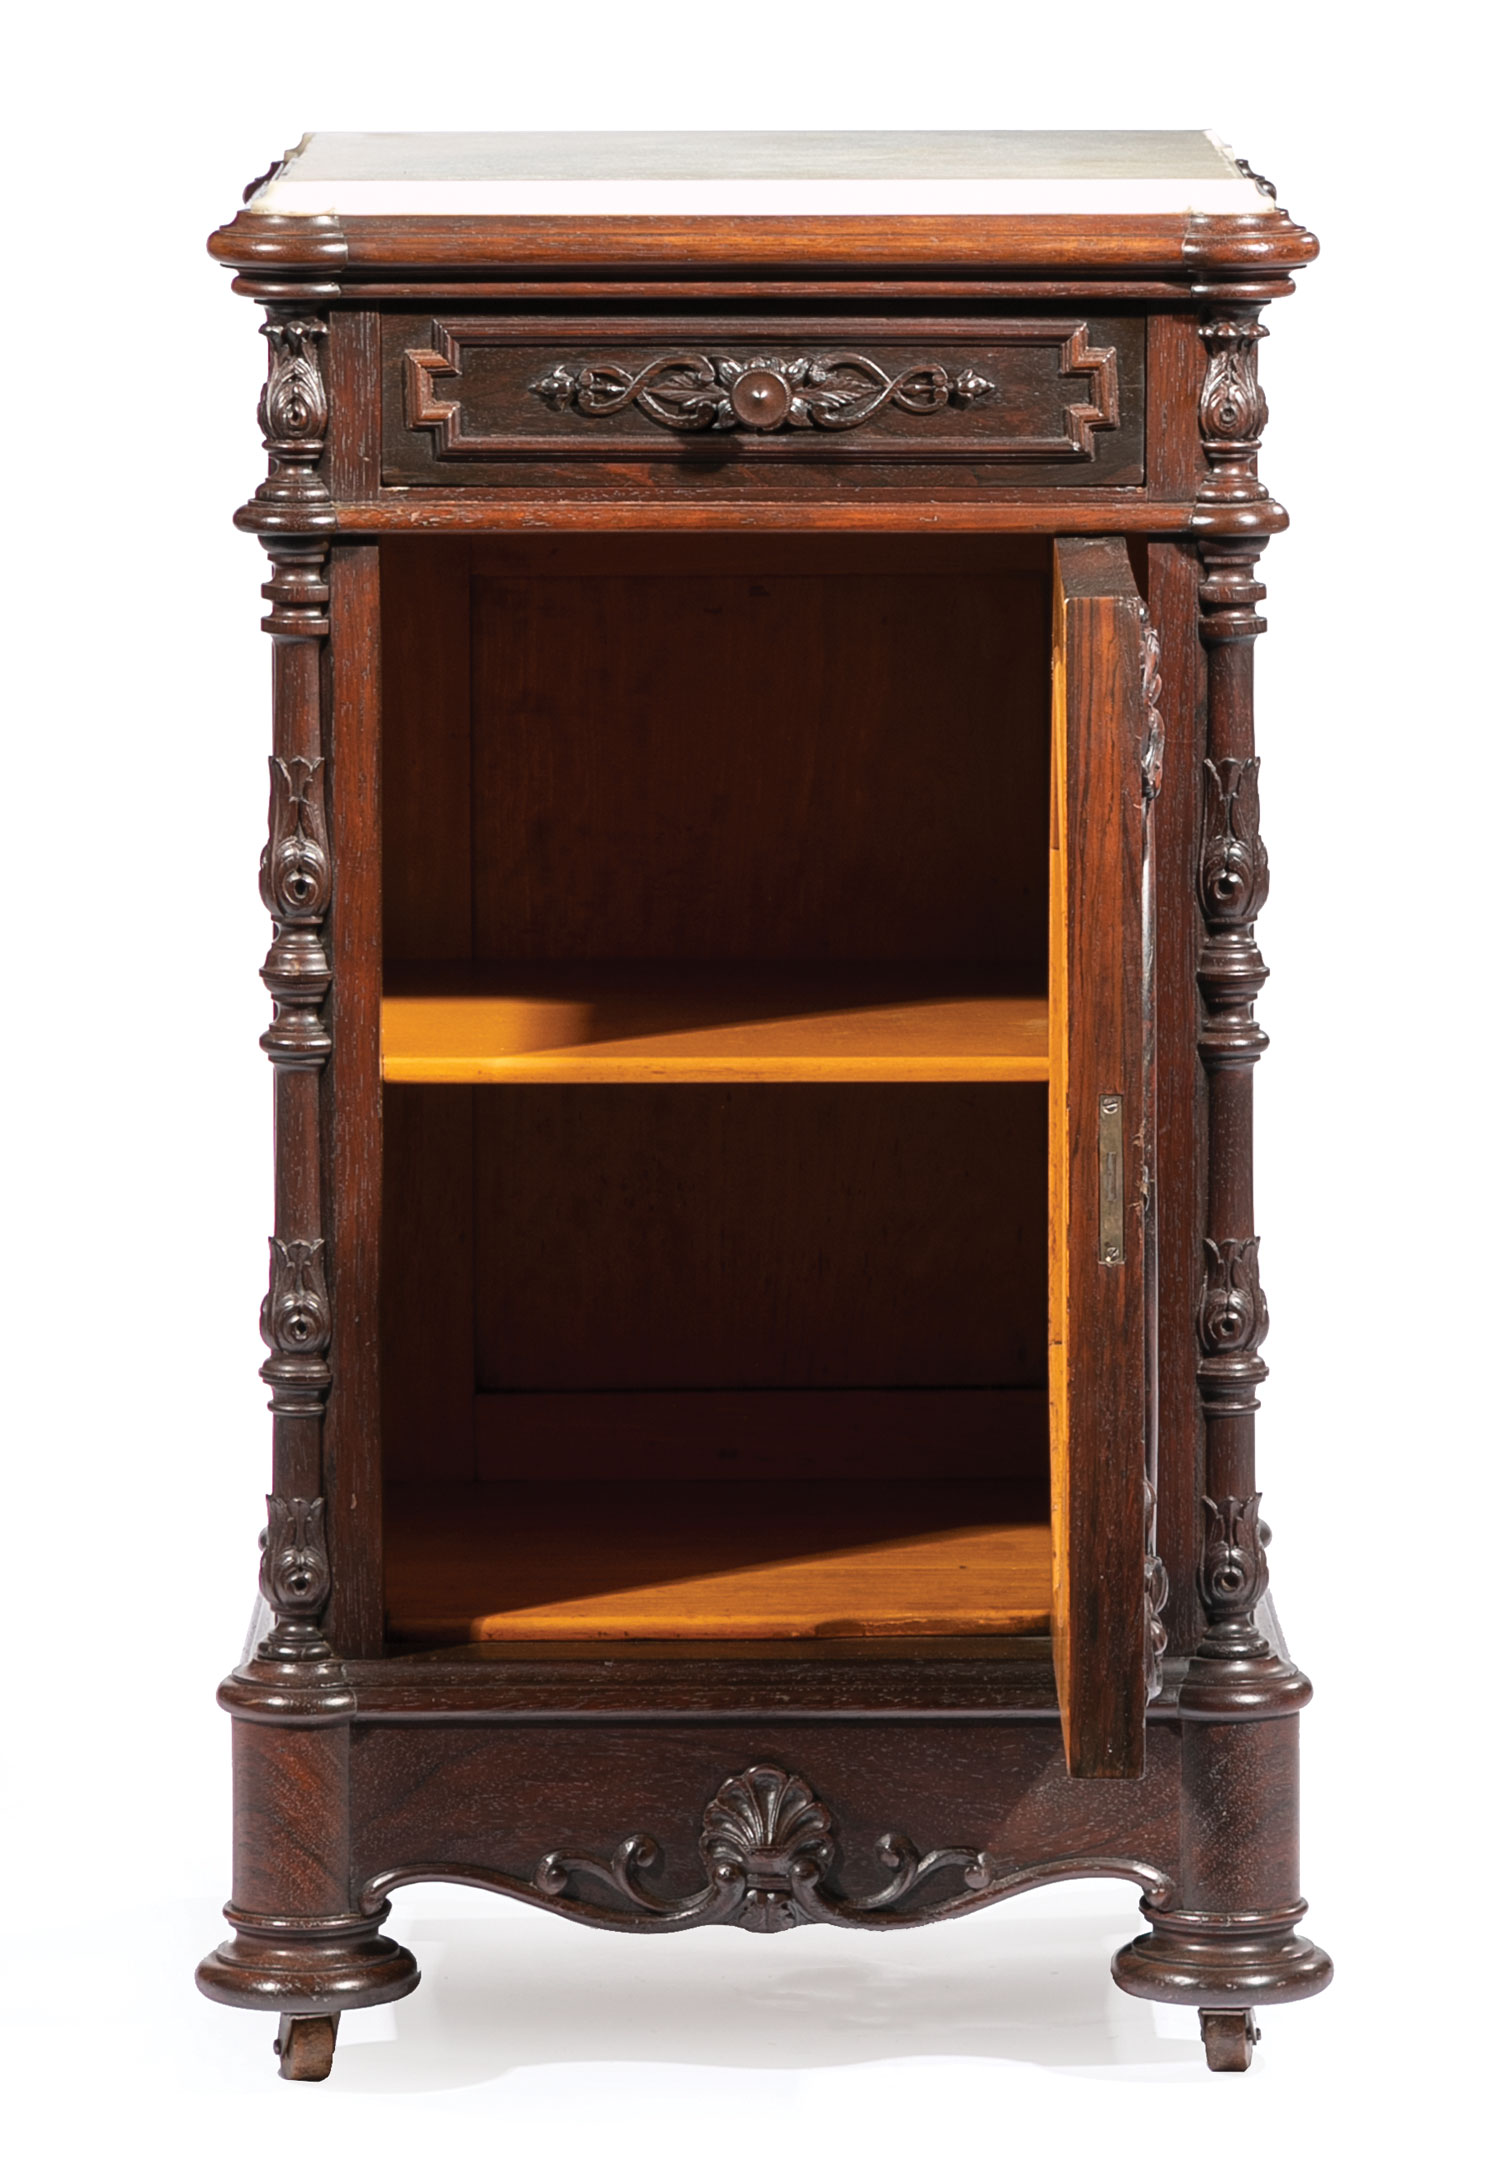 Very Fine American Carved Rosewood Bedroom Suite , mid-19th c., labeled A. (Alexander) Roux, incl. - Image 16 of 20